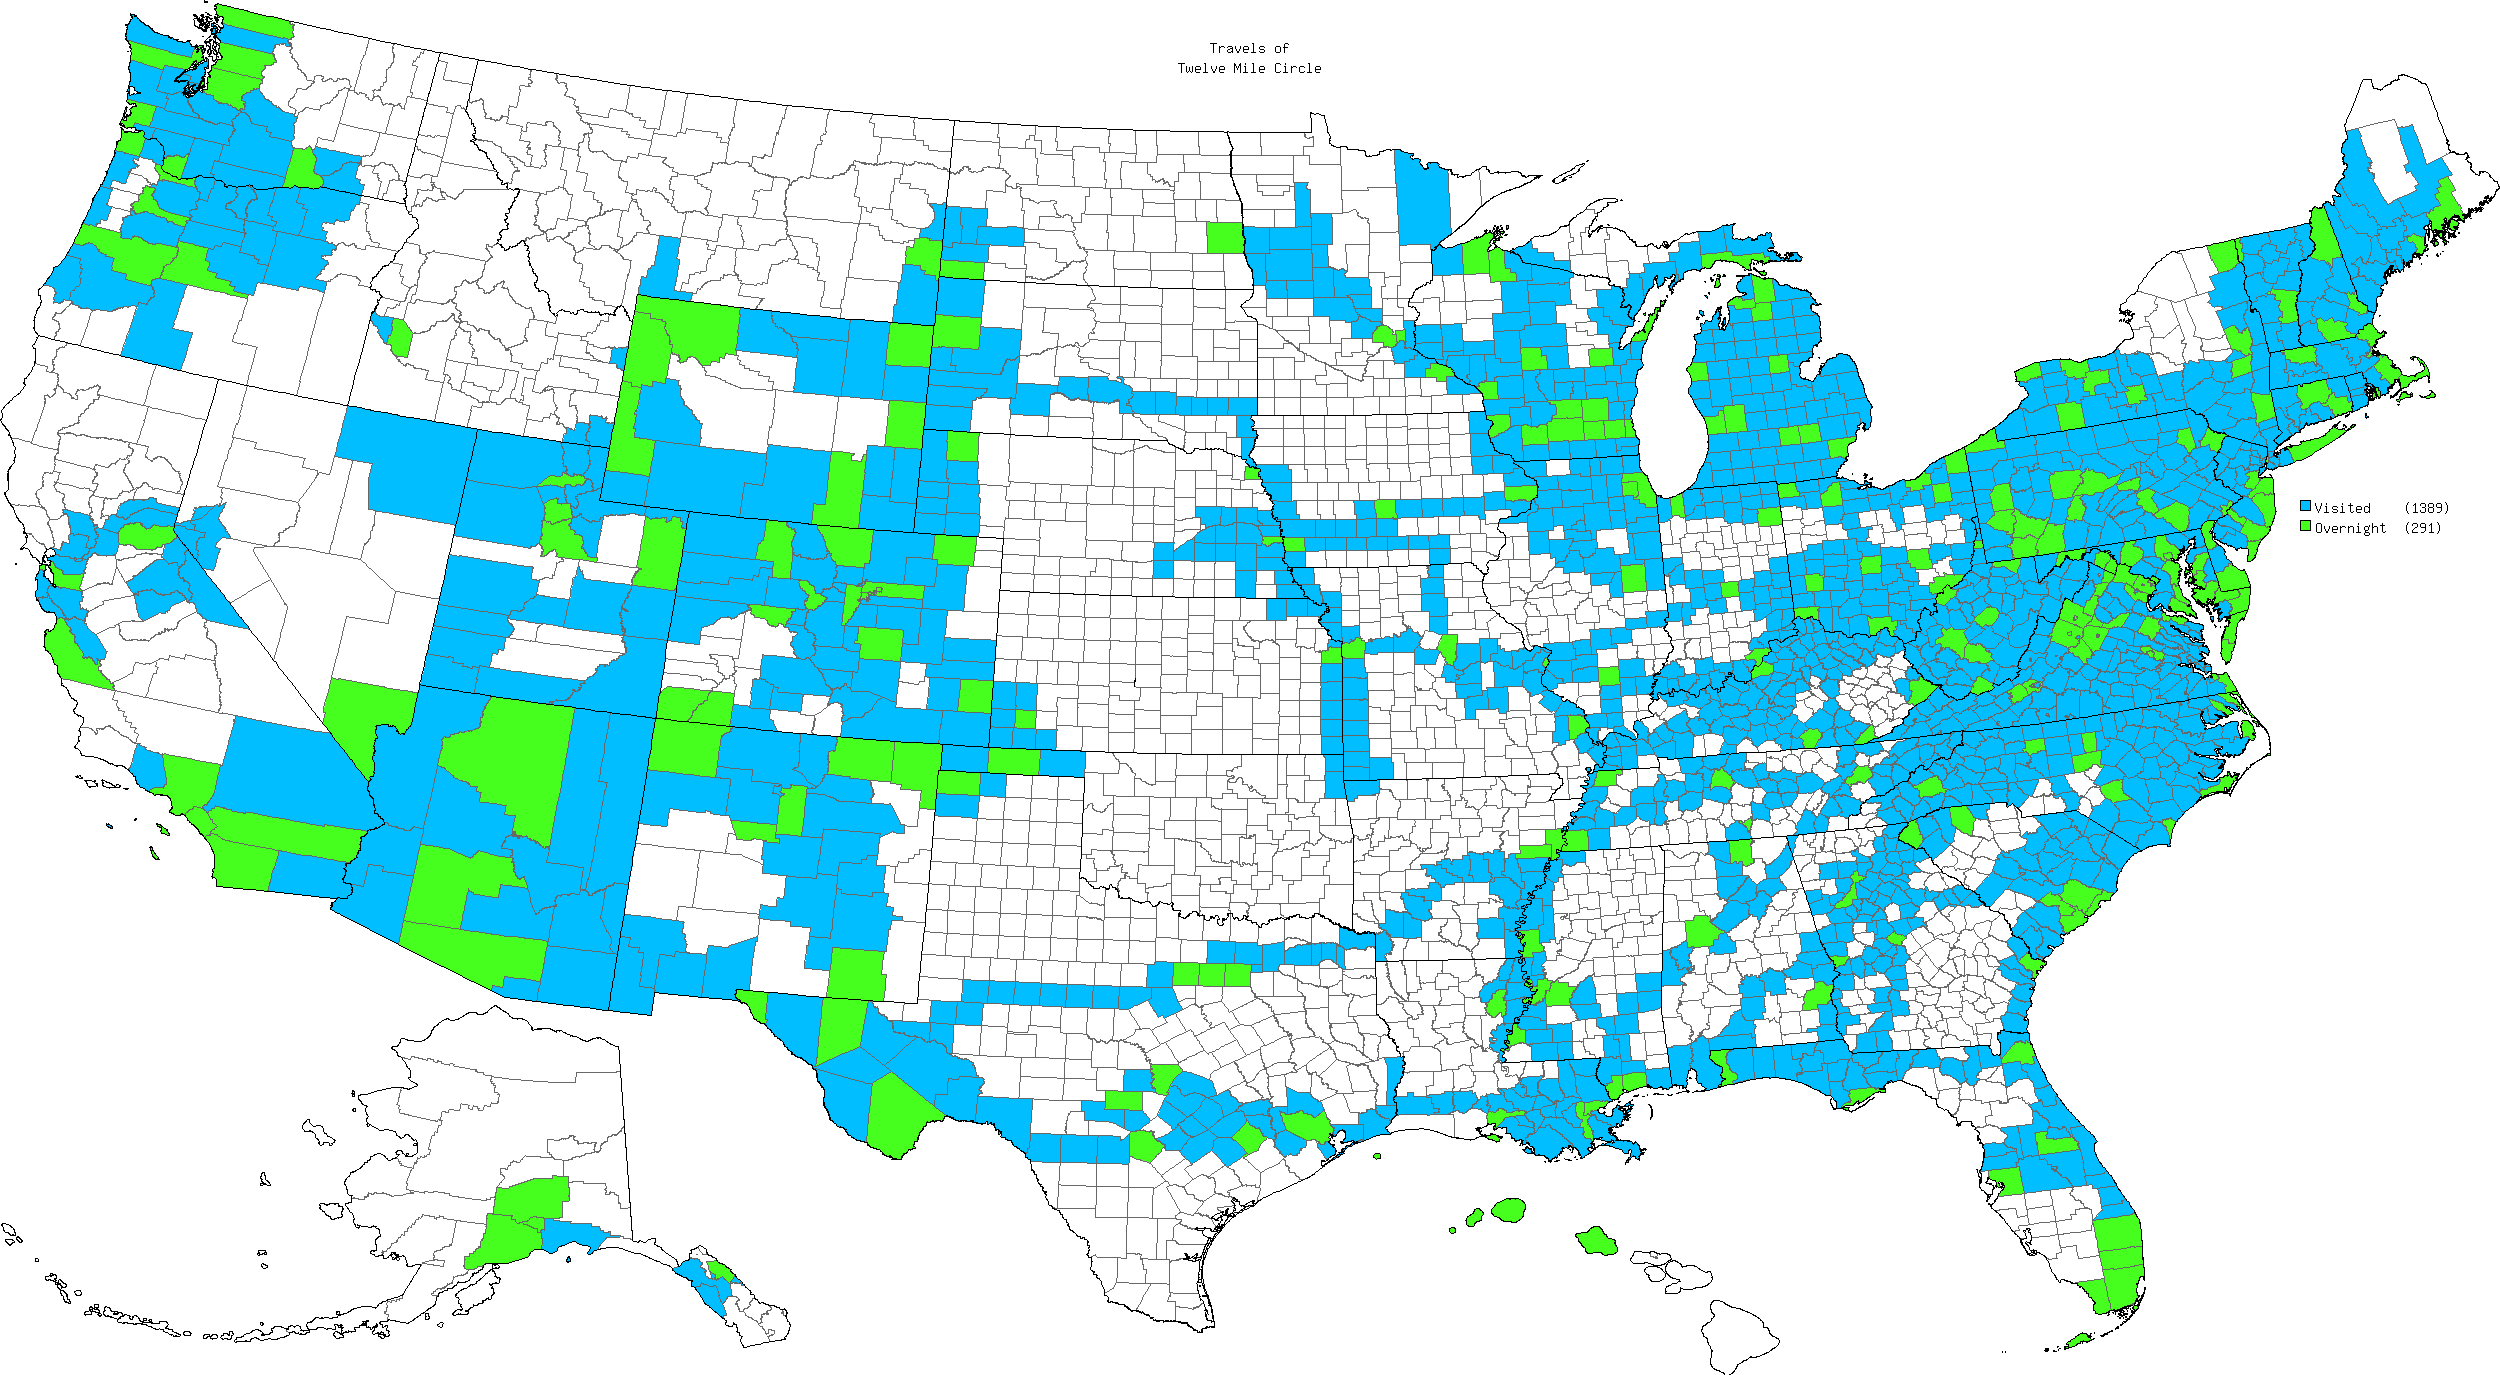 United States Counties that I have visited.